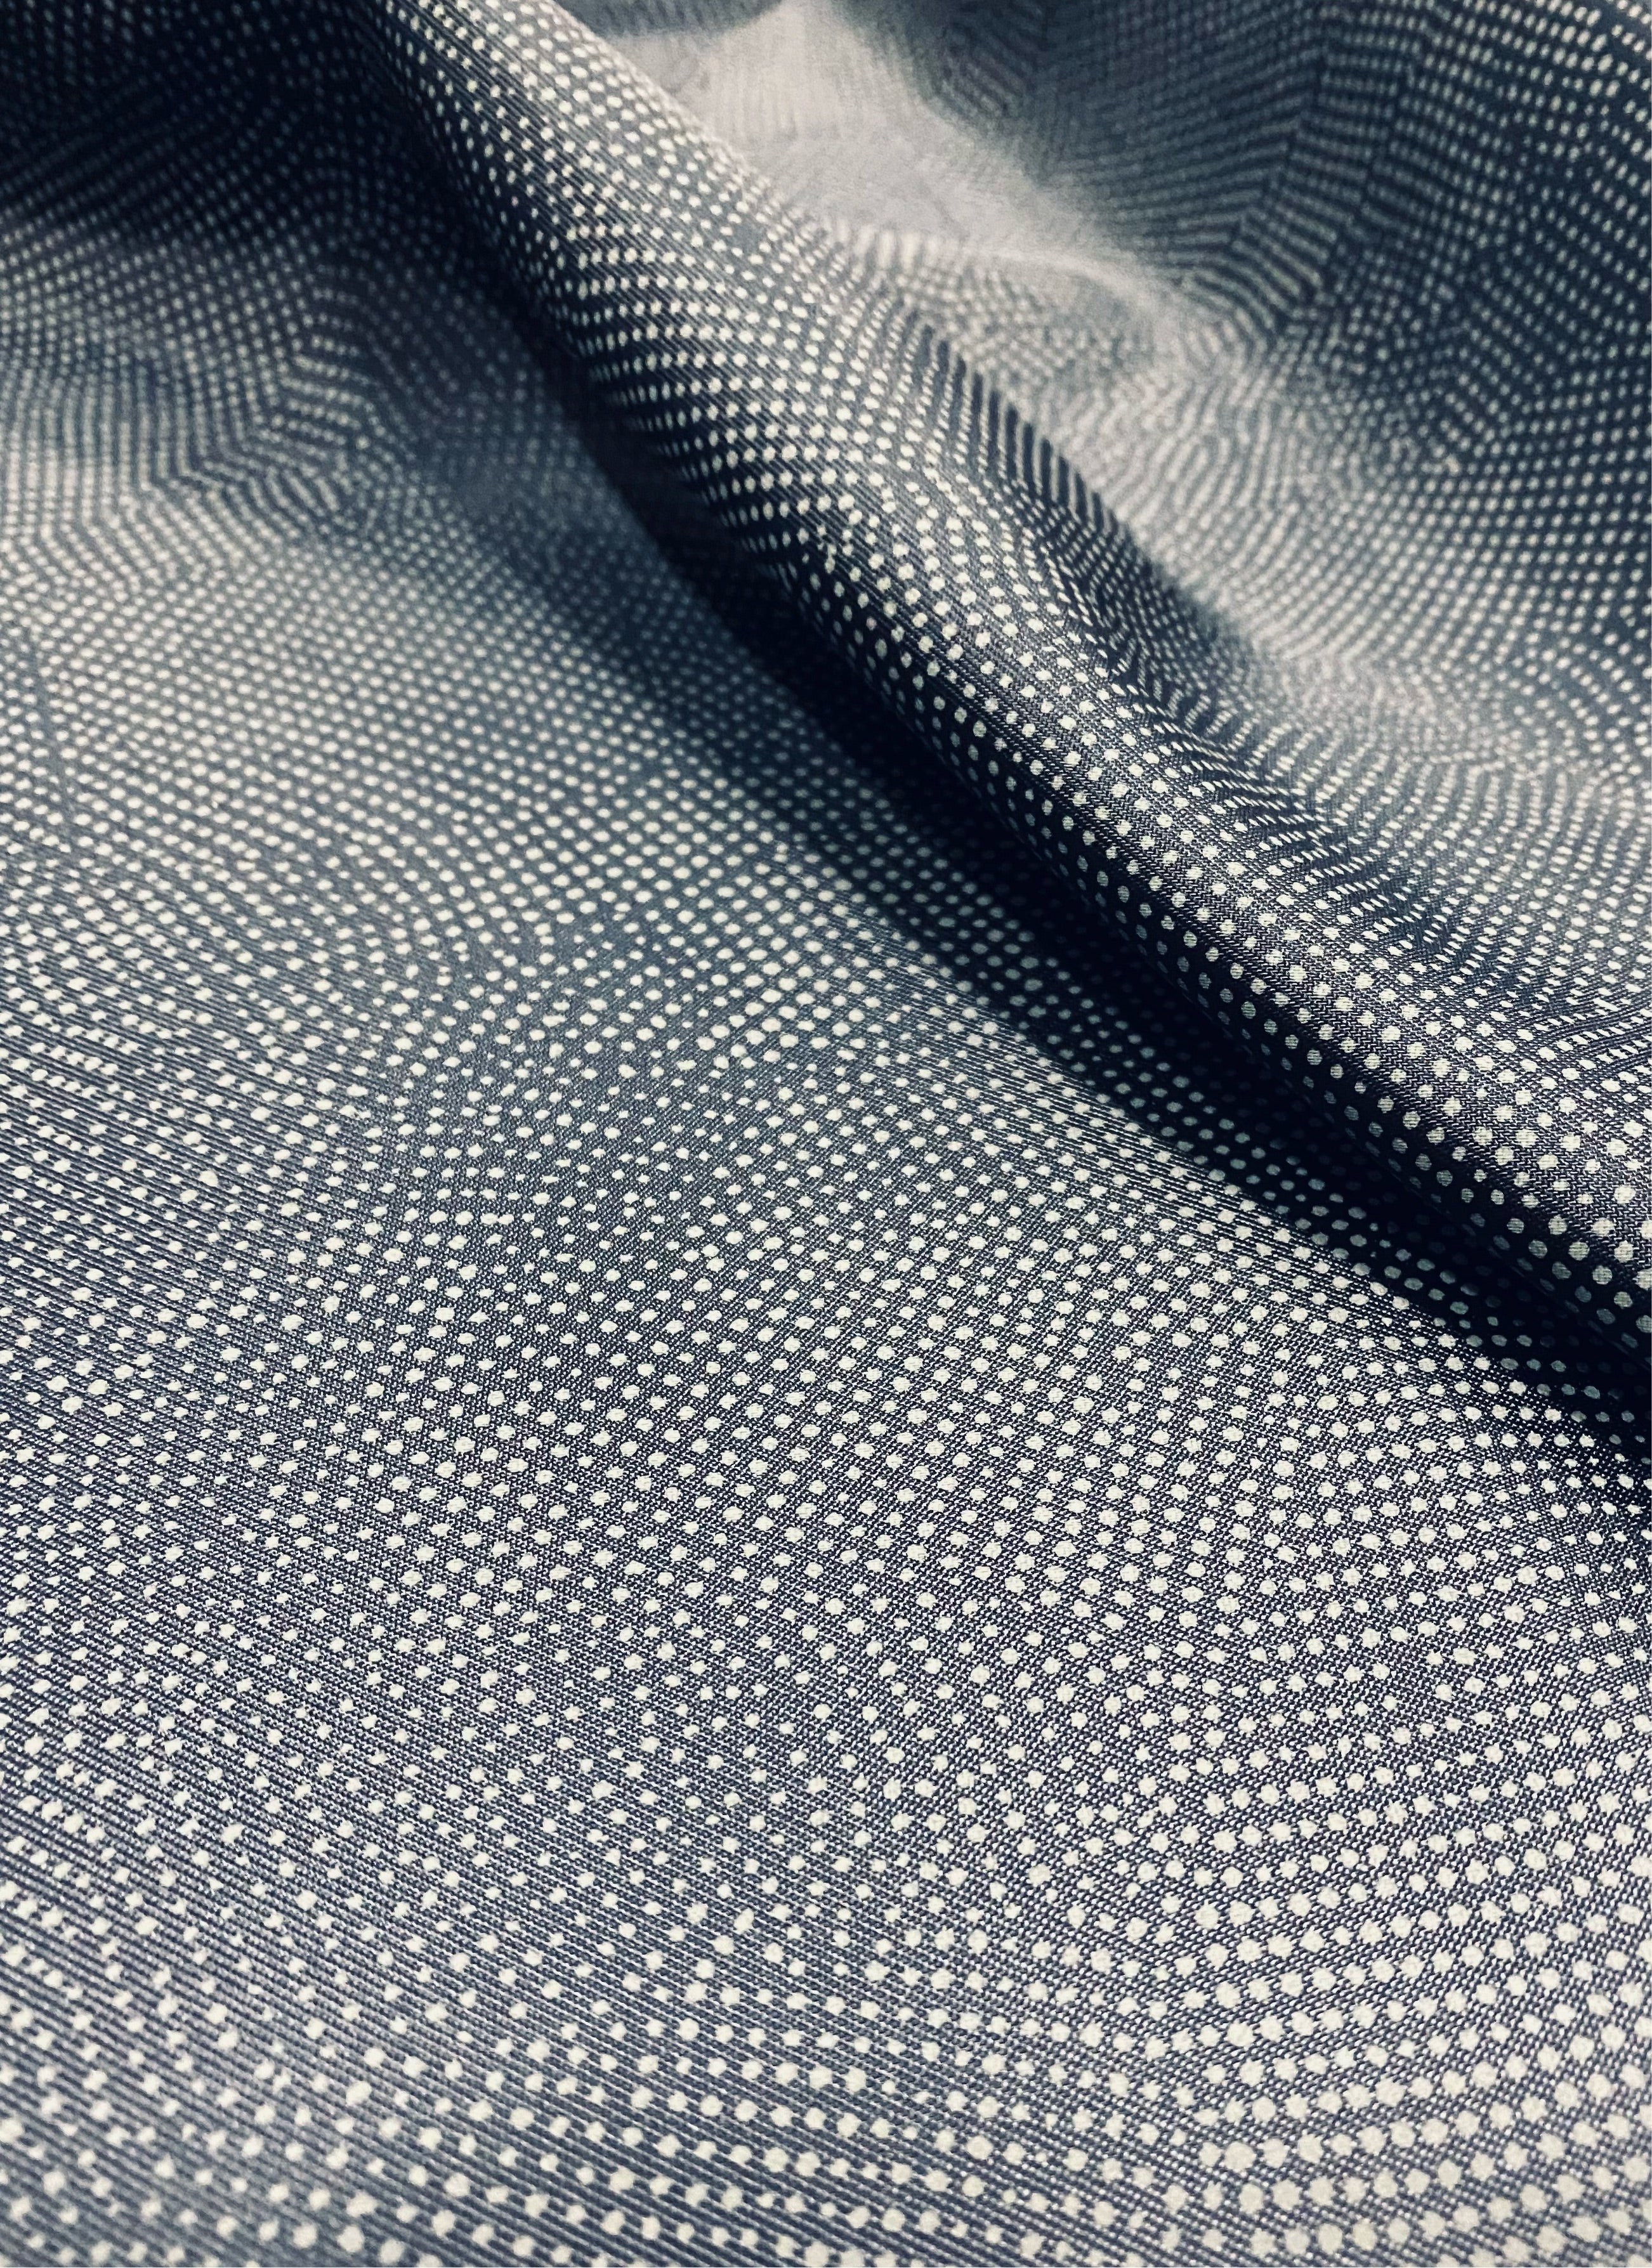 No. 431 Lining in dark blue with dots